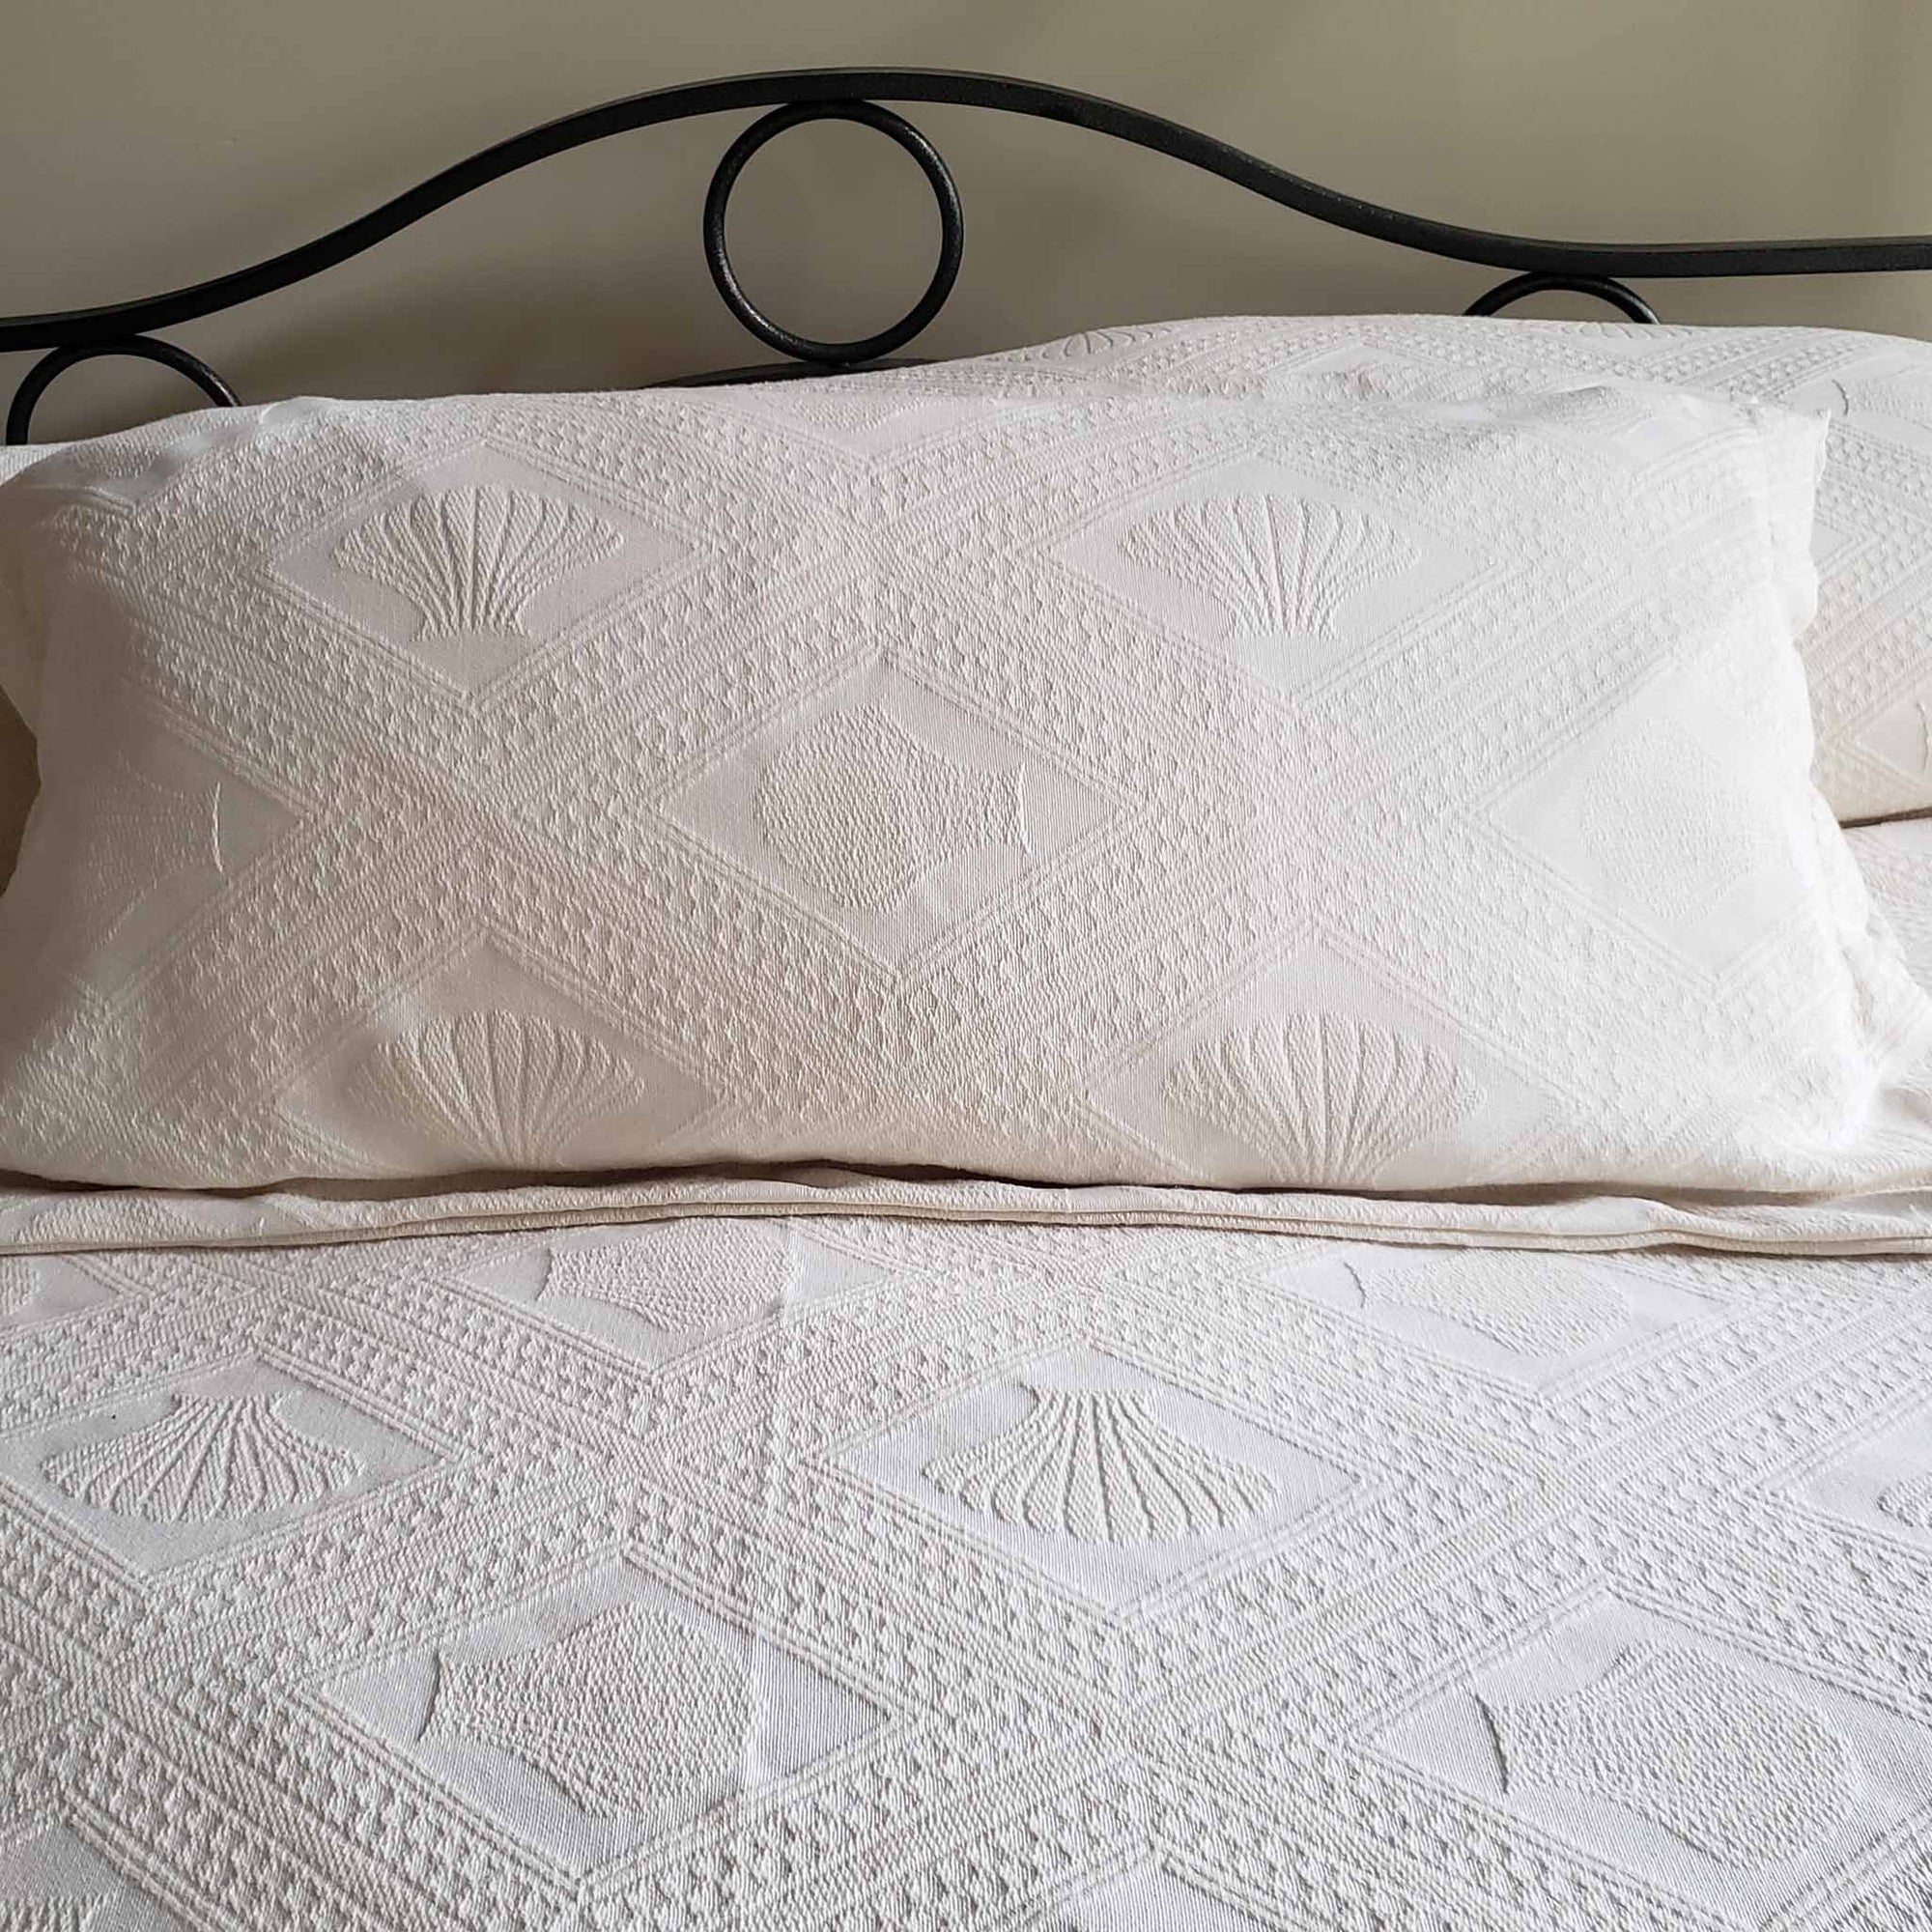 Our richly textured luxury woven Jacquard Avalon design pillow shams add a simple but elegant finished look to your bed.